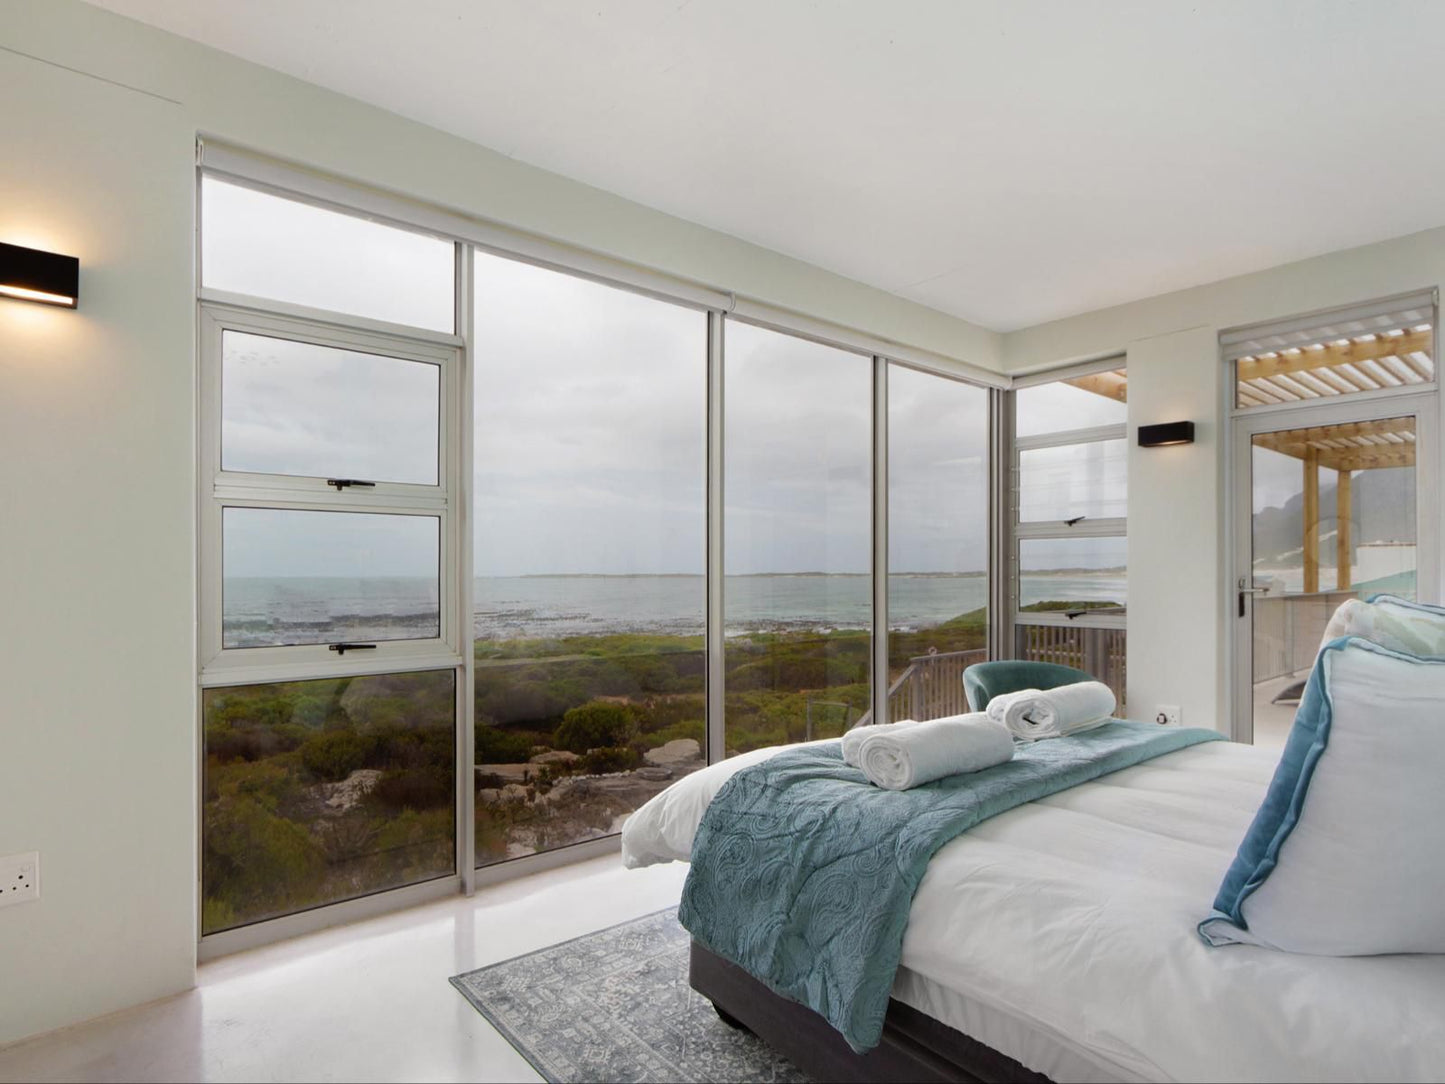 Blueview On Silversand By Hostagents Bettys Bay Western Cape South Africa Unsaturated, Bedroom